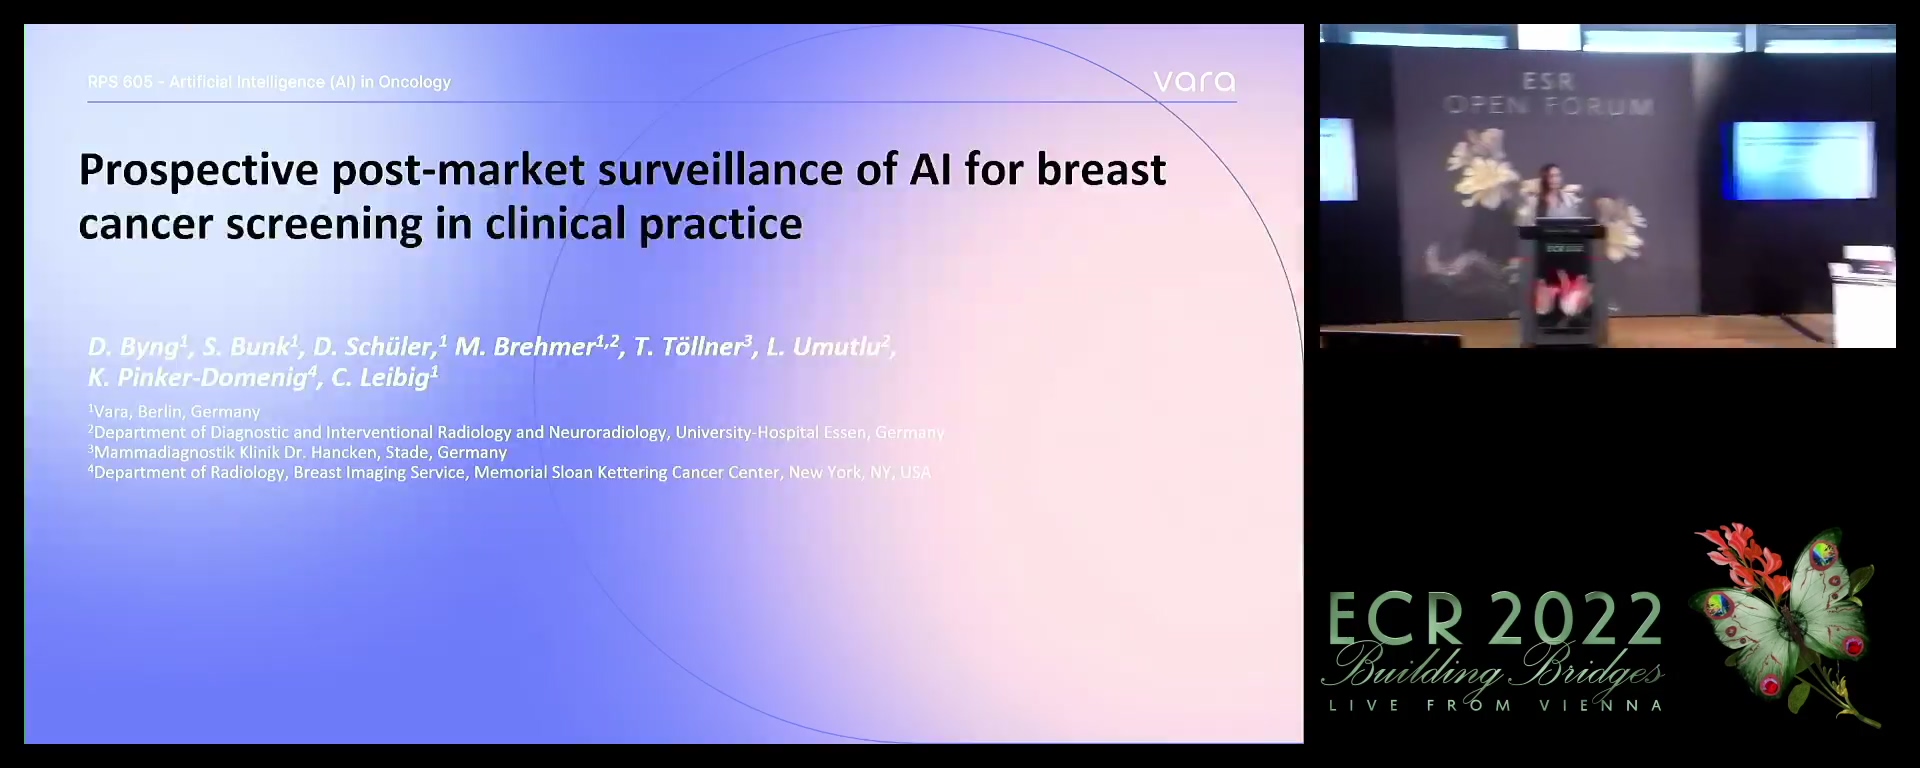 Prospective post-marketing surveillance of AI for breast cancer screening in clinical practice - Danalyn Byng, Berlin / DE